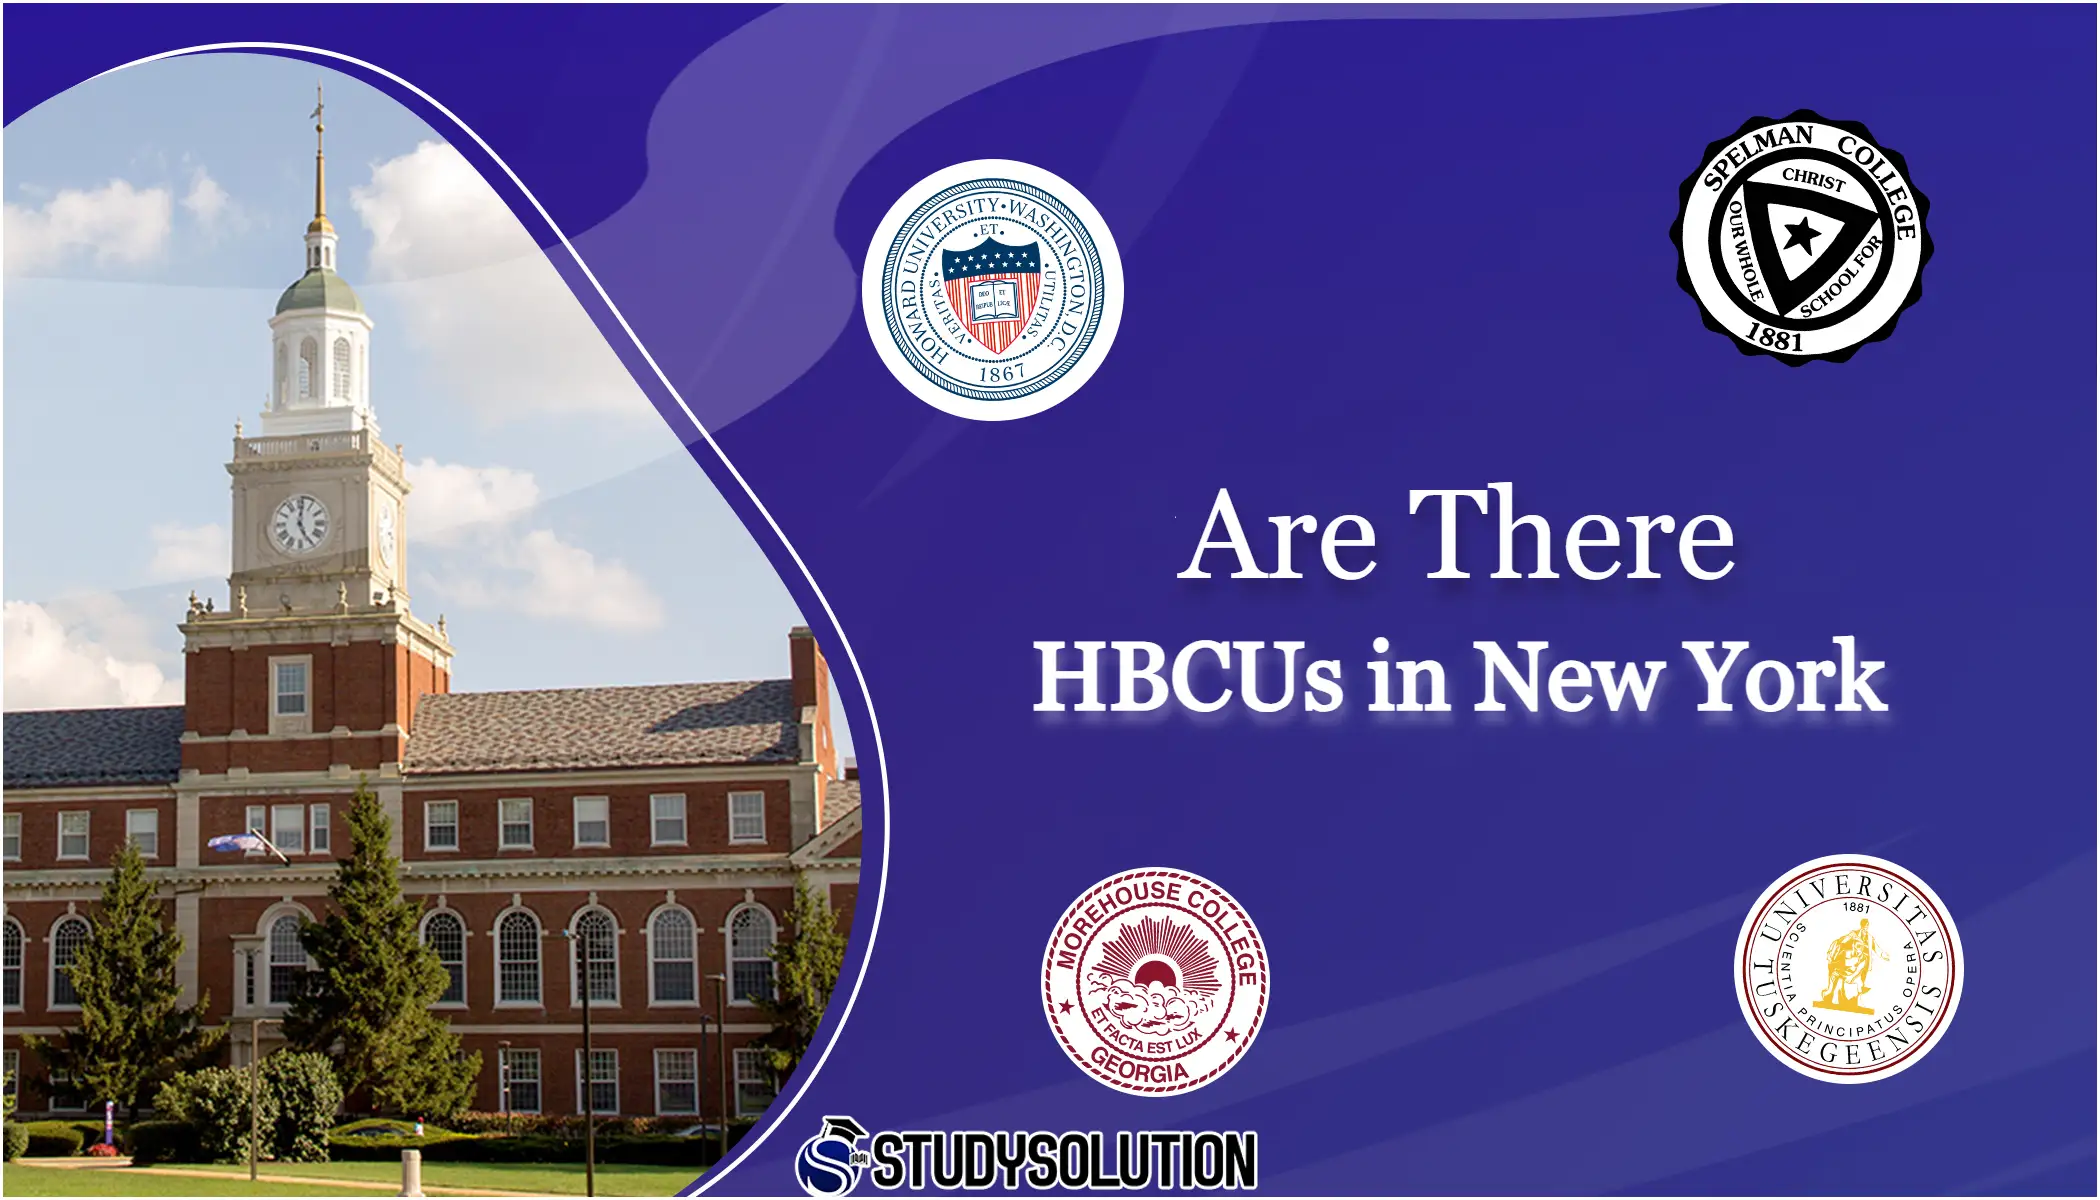 Are there HBCUs in New York and New Jersey?